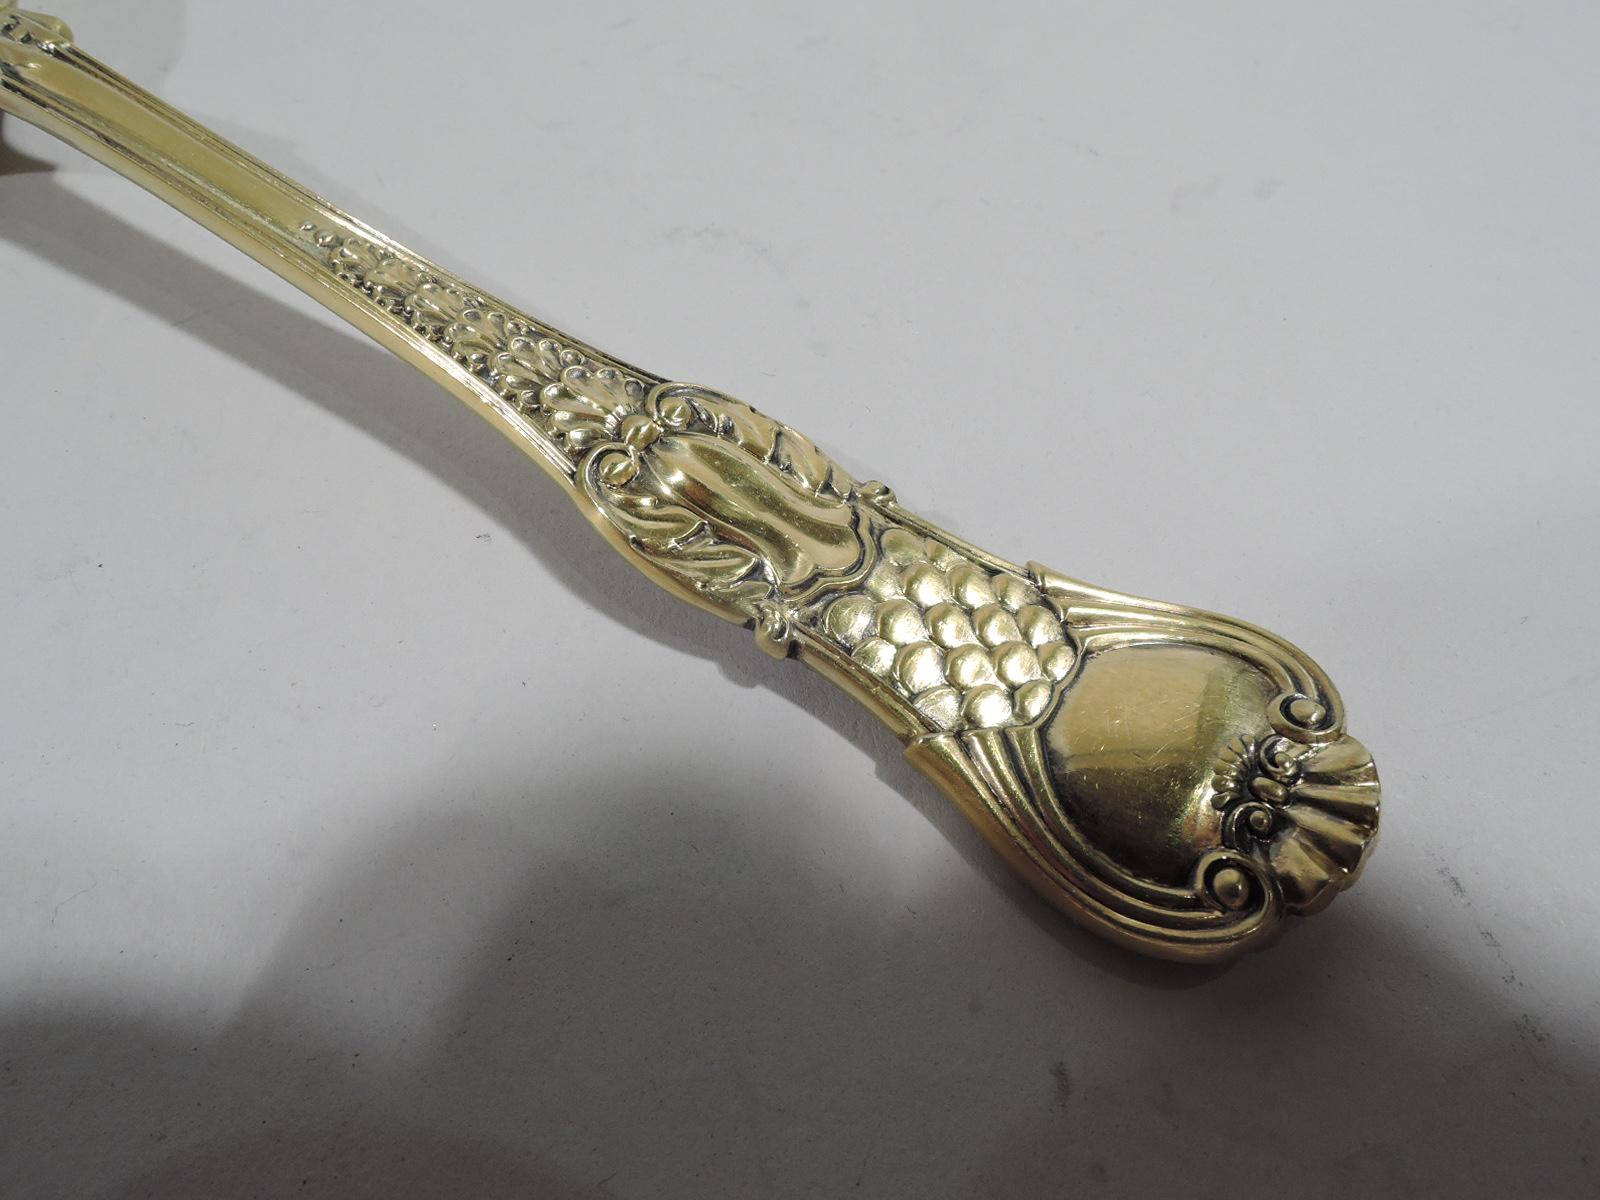 Regency English Gilt Sterling Silver Soup Spoon in Historic Coburg Pattern